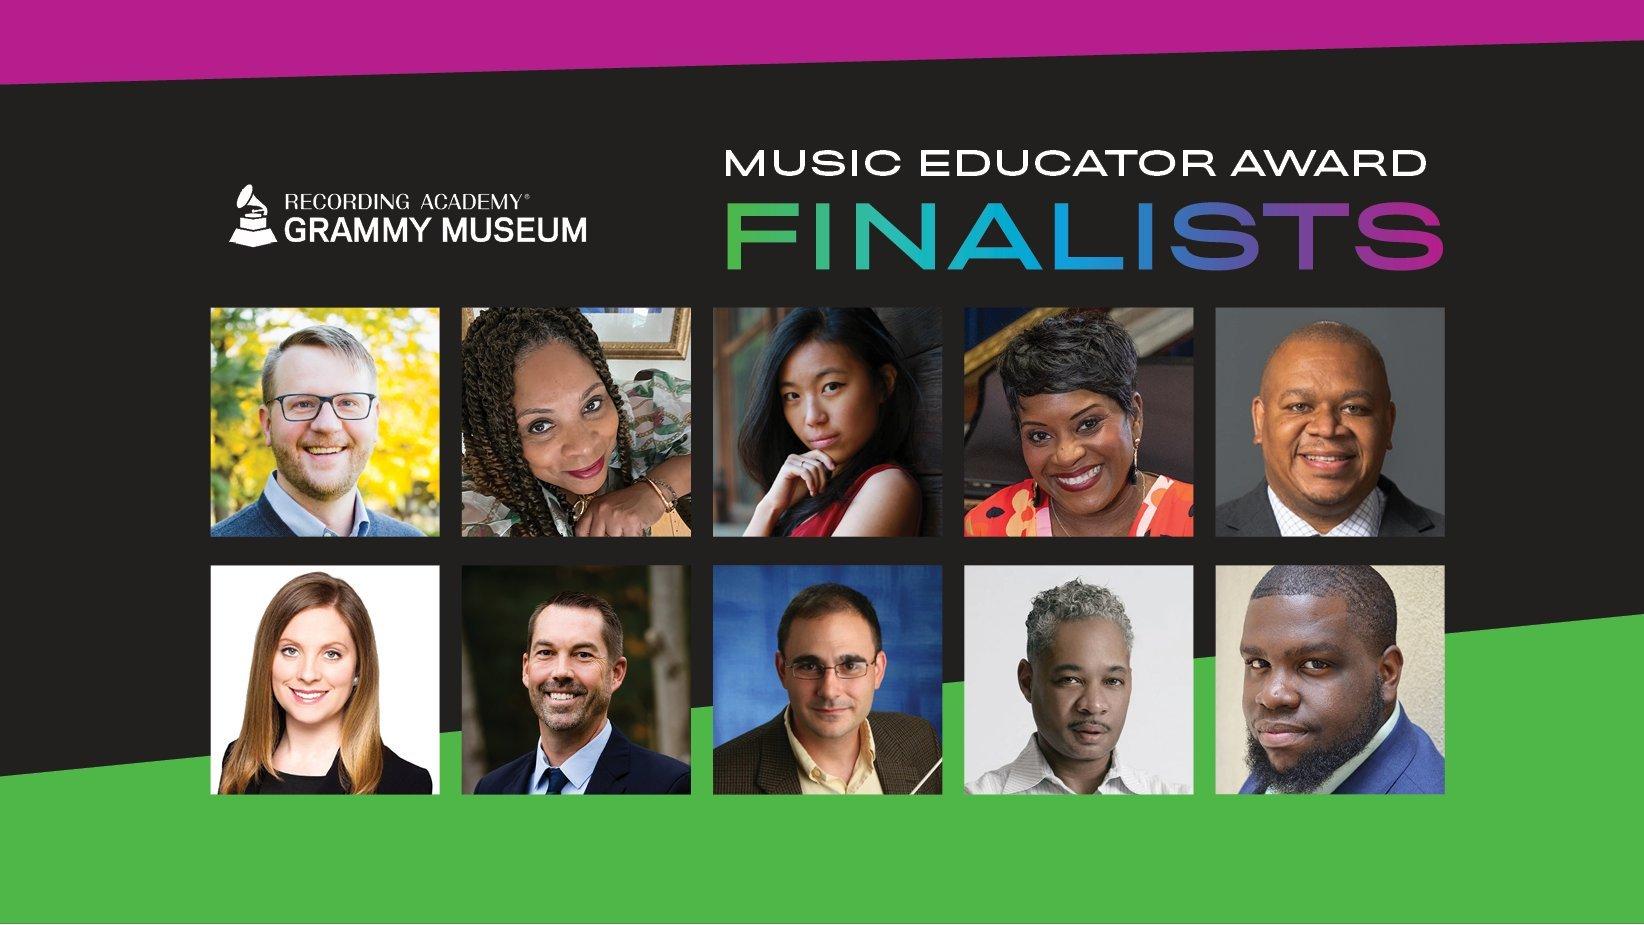 Graphic featuring photos of the 2023 Music Educator Award Finalists